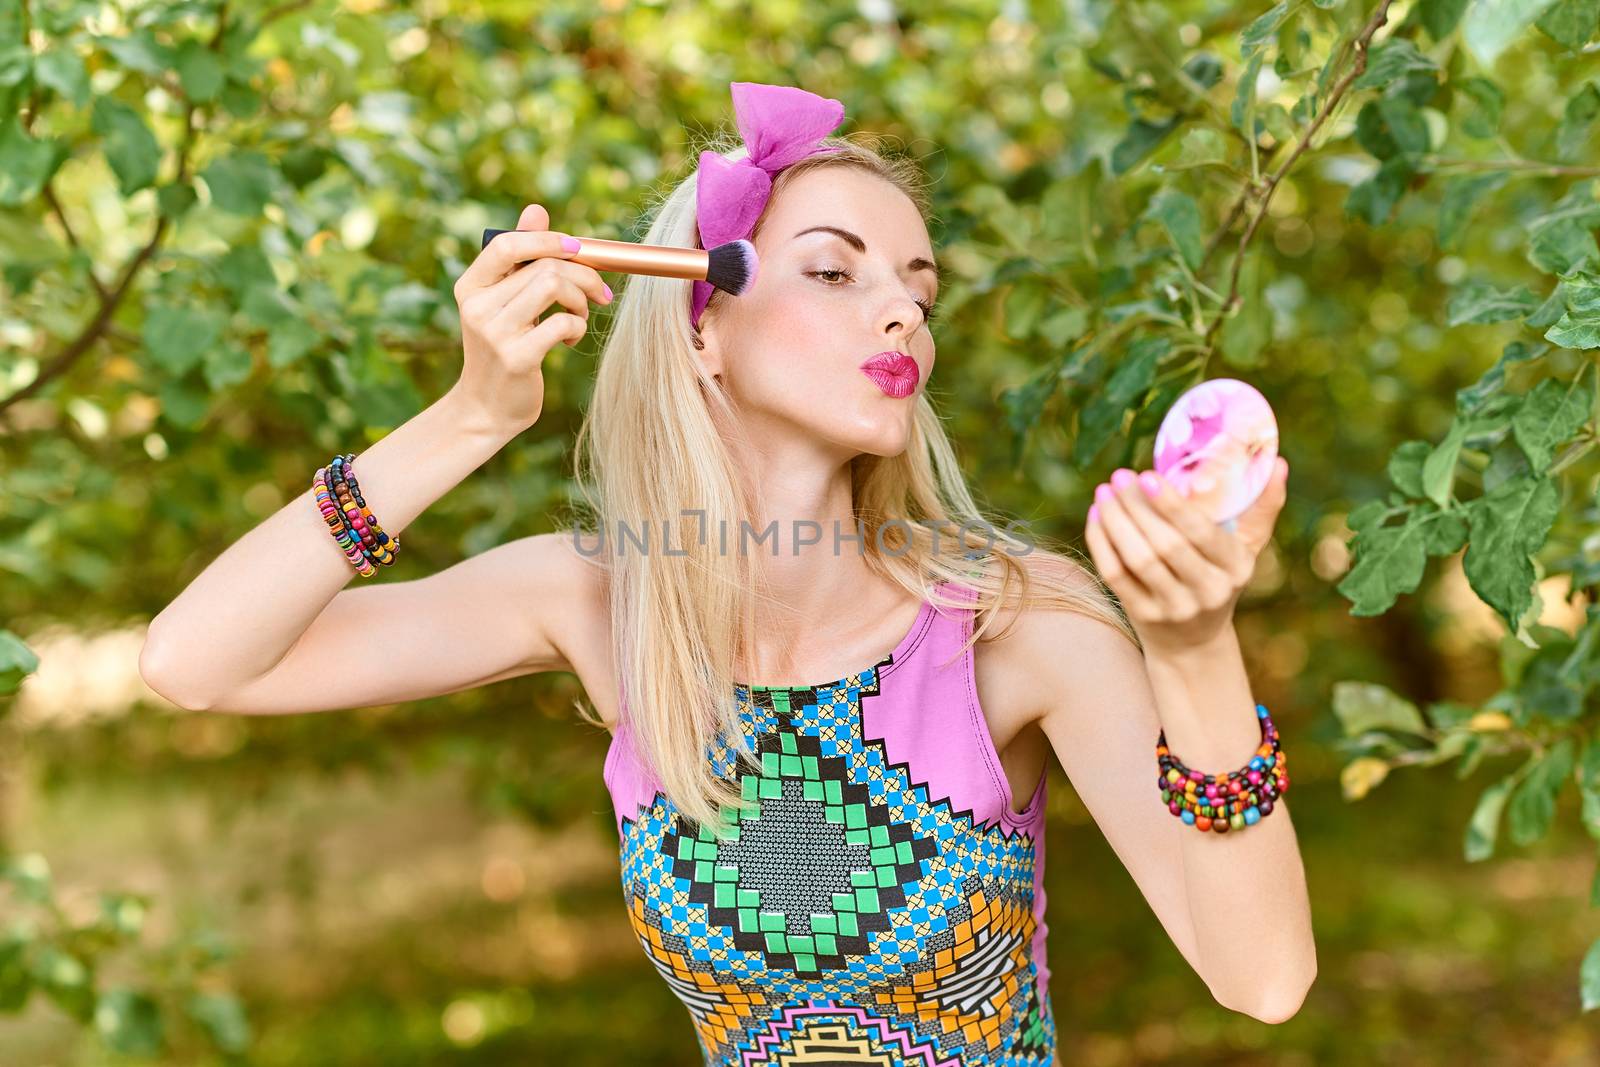 Beauty portrait stylish playful woman primping with mirror in park, people, outdoors. Attractive hipster happy pretty blonde girl with bow, fashionable top. Relax in summer garden, lifestyle, bokeh